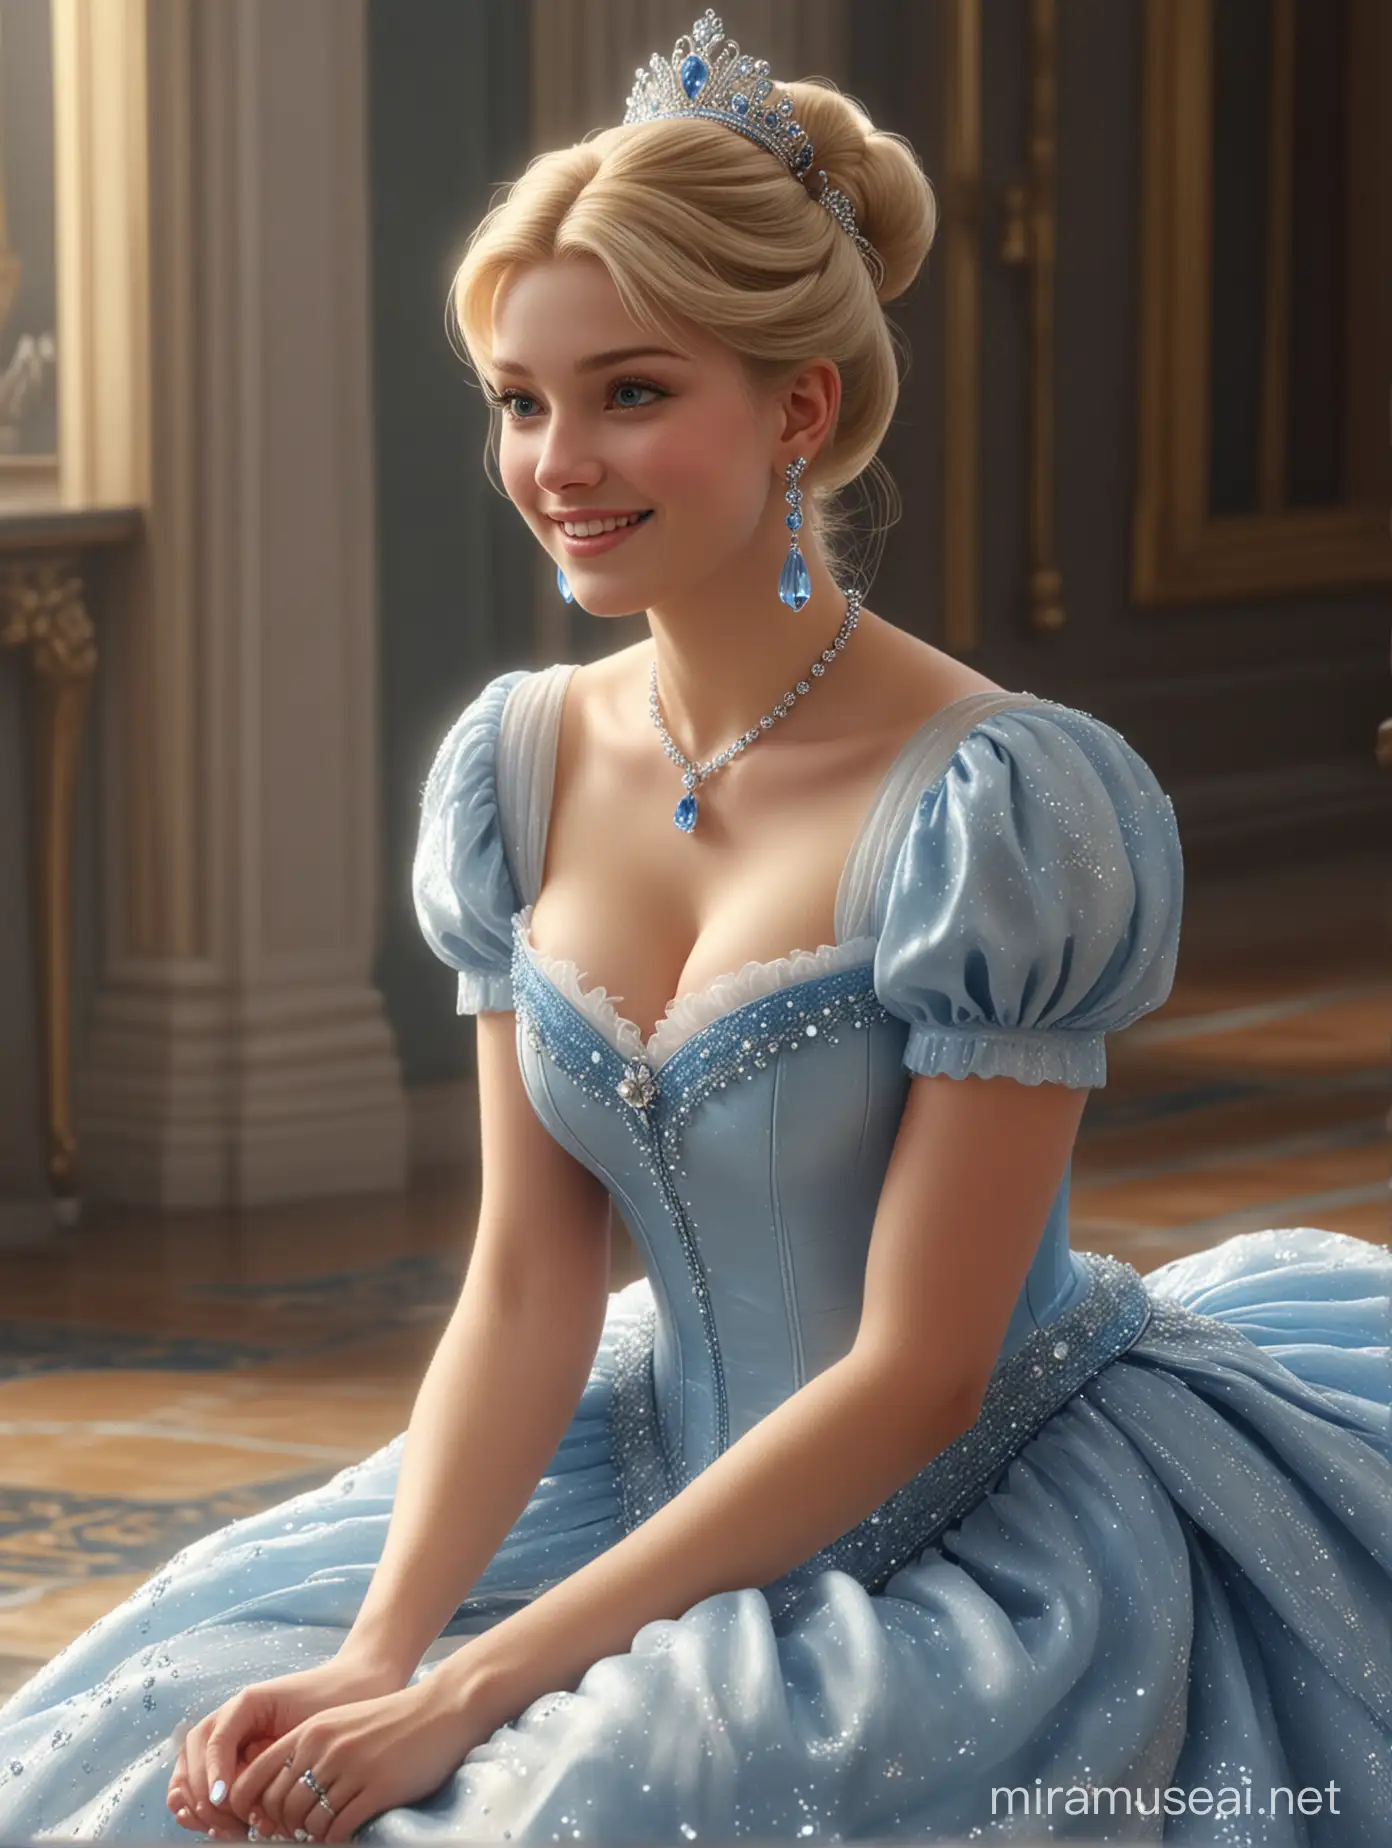 Seen from the front is a beautiful Cinderella with blonde hair in a bun, wearing earrings and a diamond necklace with a realistic face smiling gently, wearing a long, short-sleeved blue and white dress. Inside the palace, a handsome prince came and knelt down to put clear crystal glass shoes on Cinderella's feet.ultra hd.hyperrealistic.cinematic